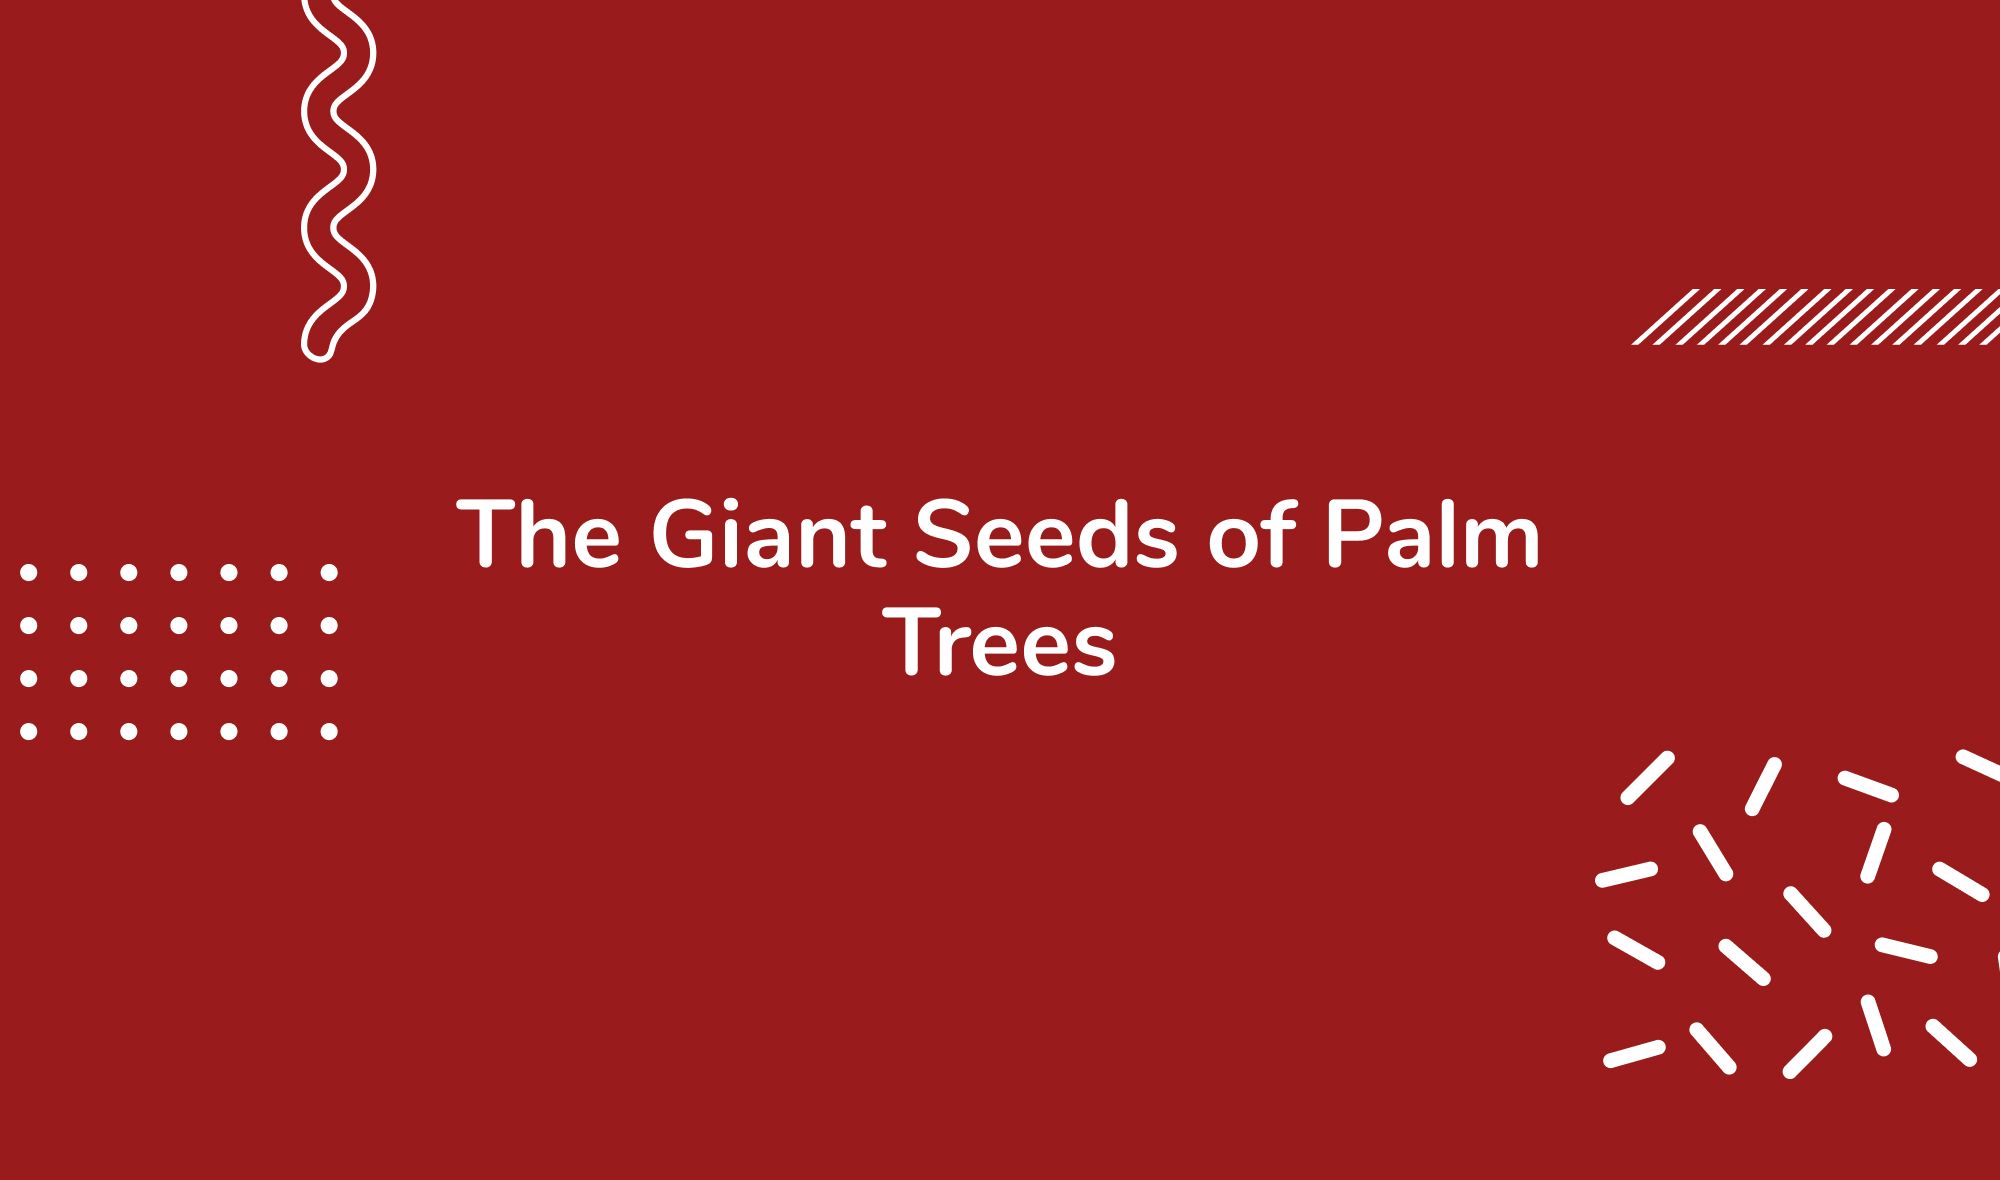 The Giant Seeds of Palm Trees